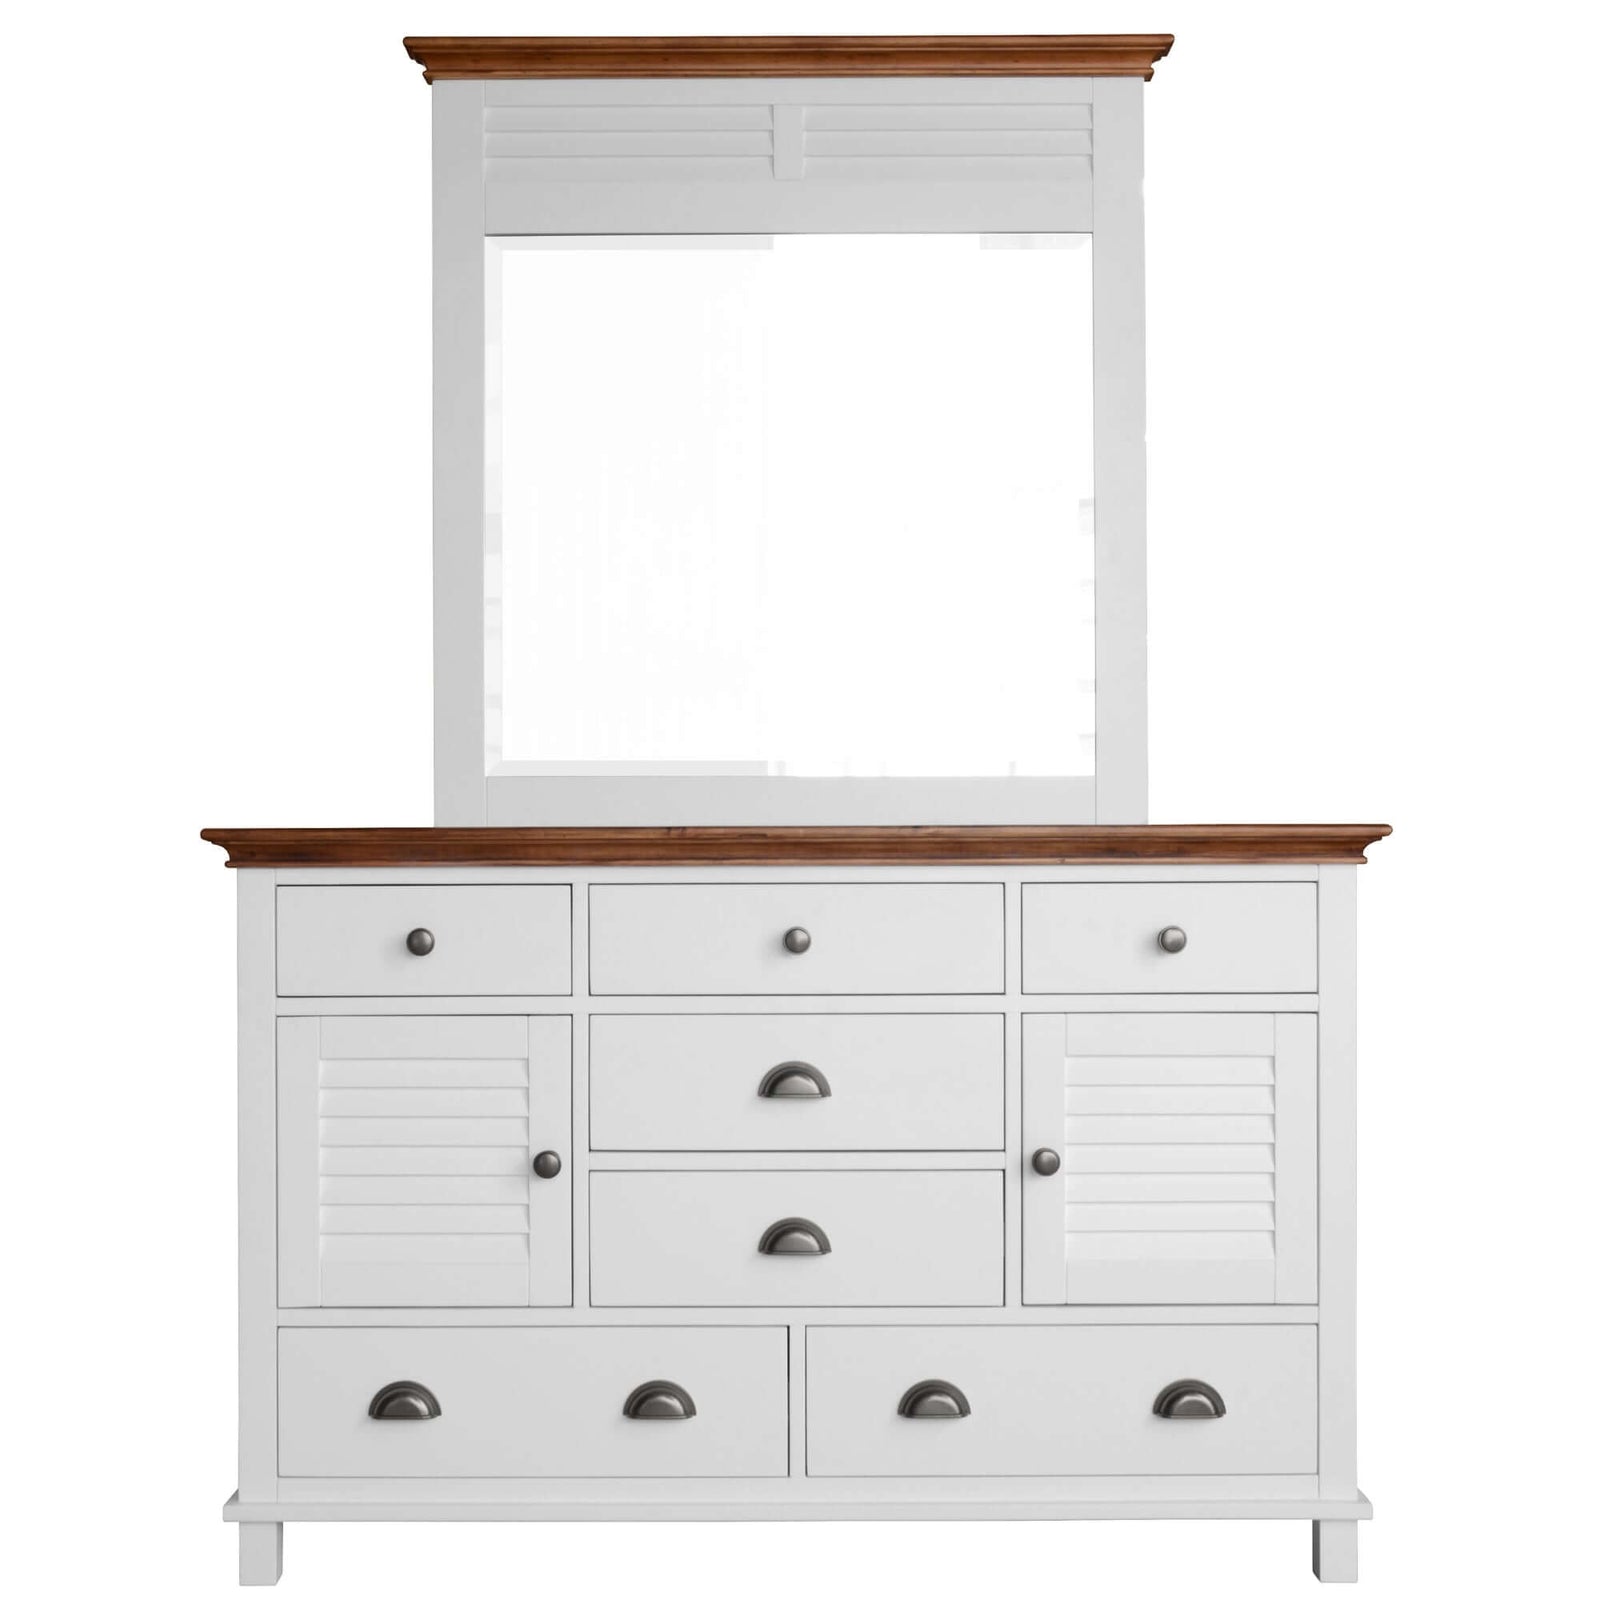 Virginia Dresser Mirror 7 Chest of Drawers Solid Wood Tallboy Cabinet - White-Upinteriors